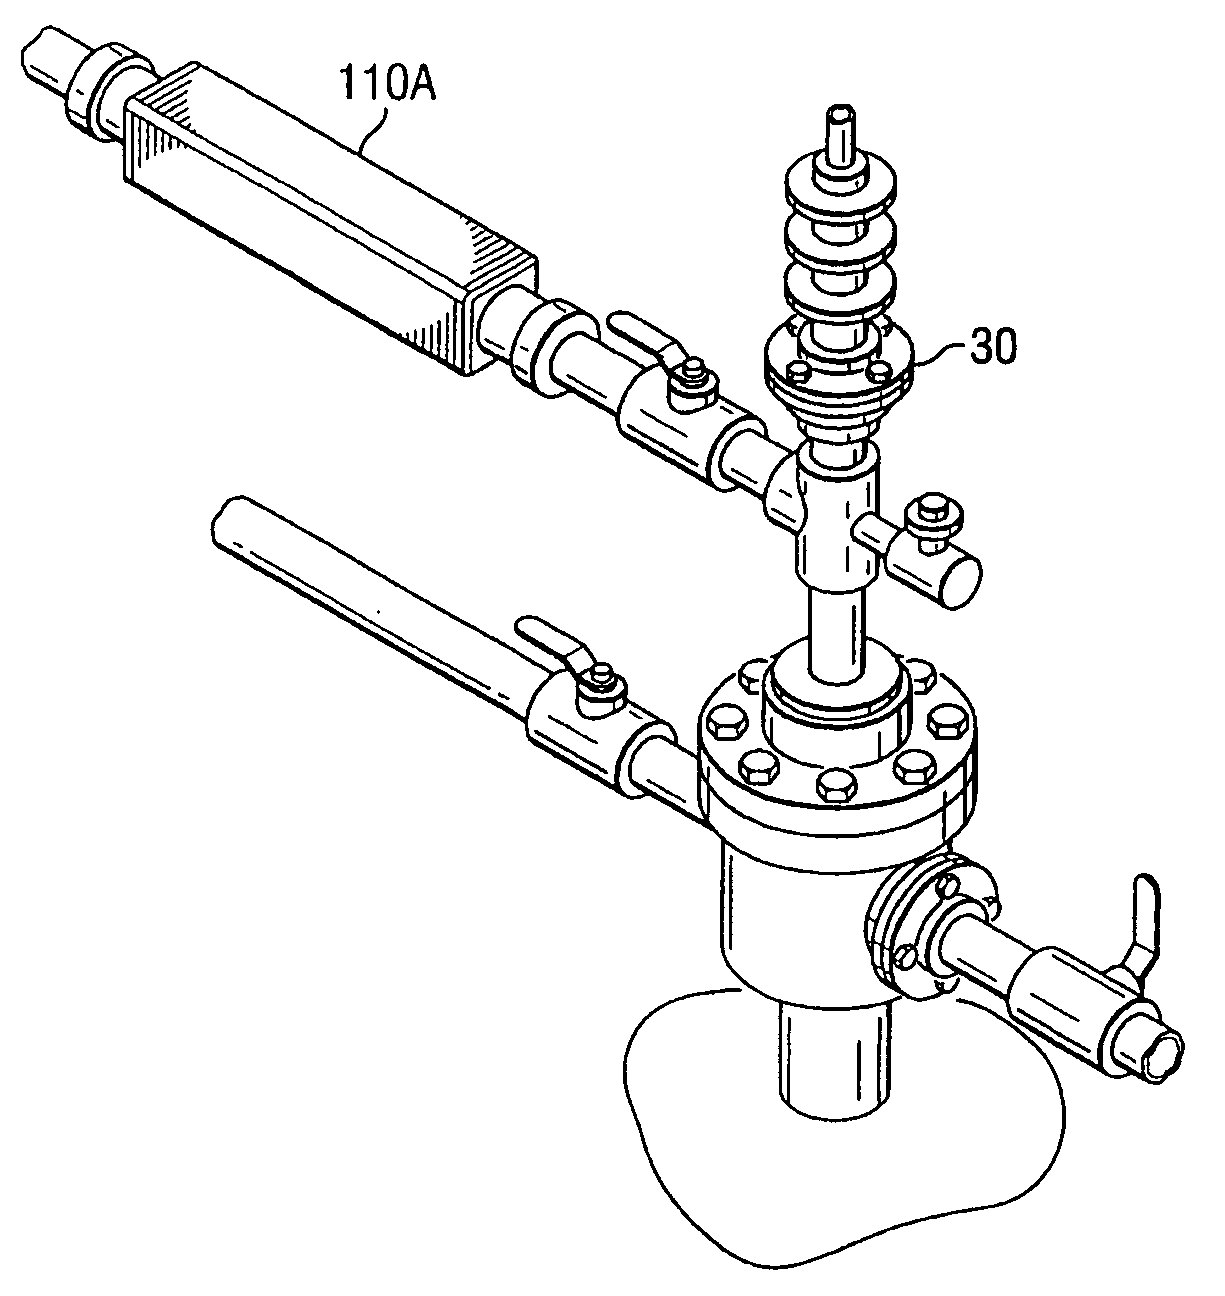 Fluid conditioning system and method